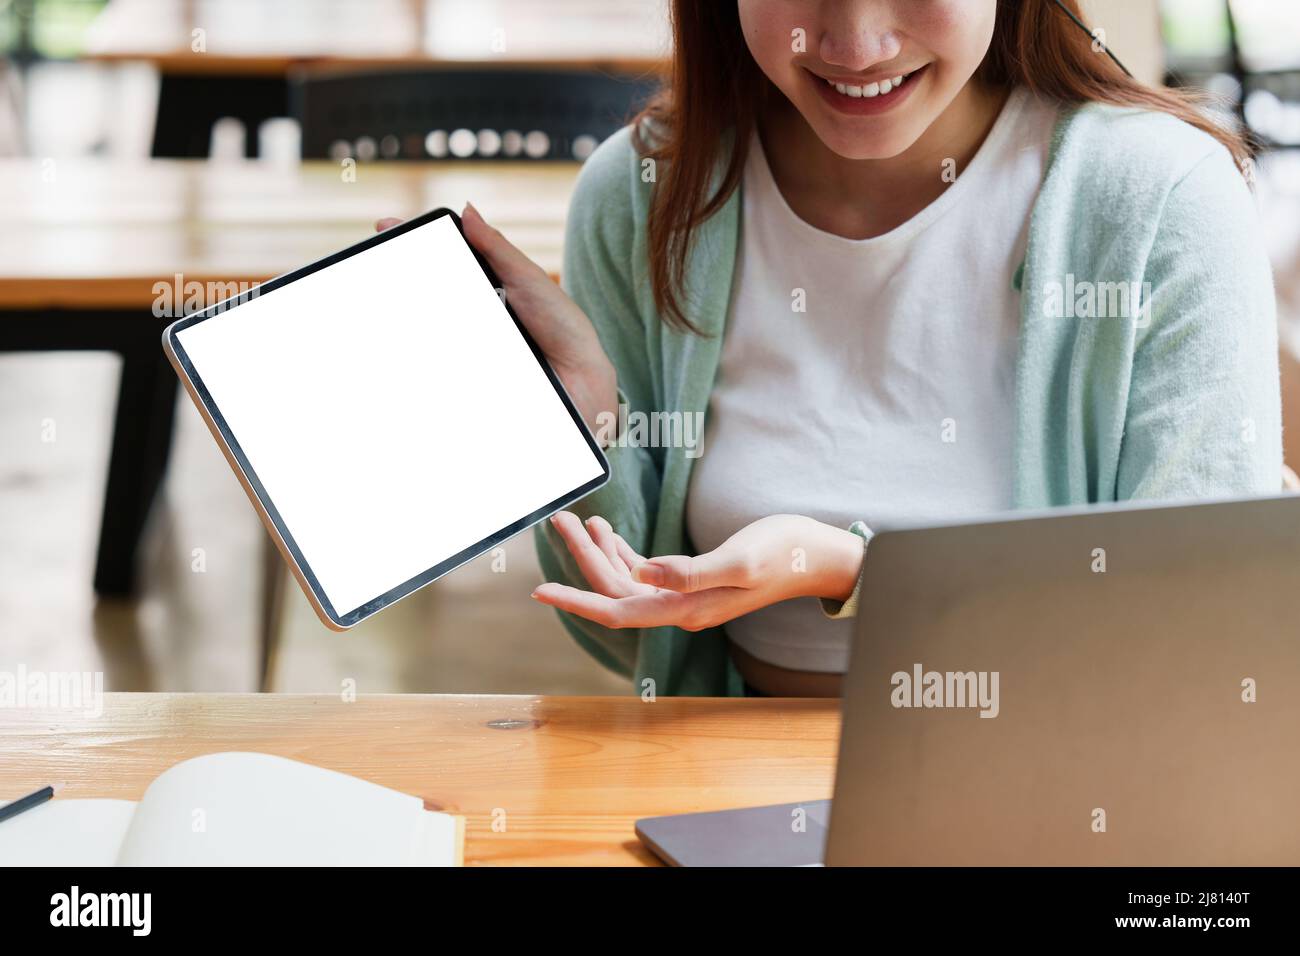 Smiling Asian attentive student studying online class. e-learning education concept. Stock Photo